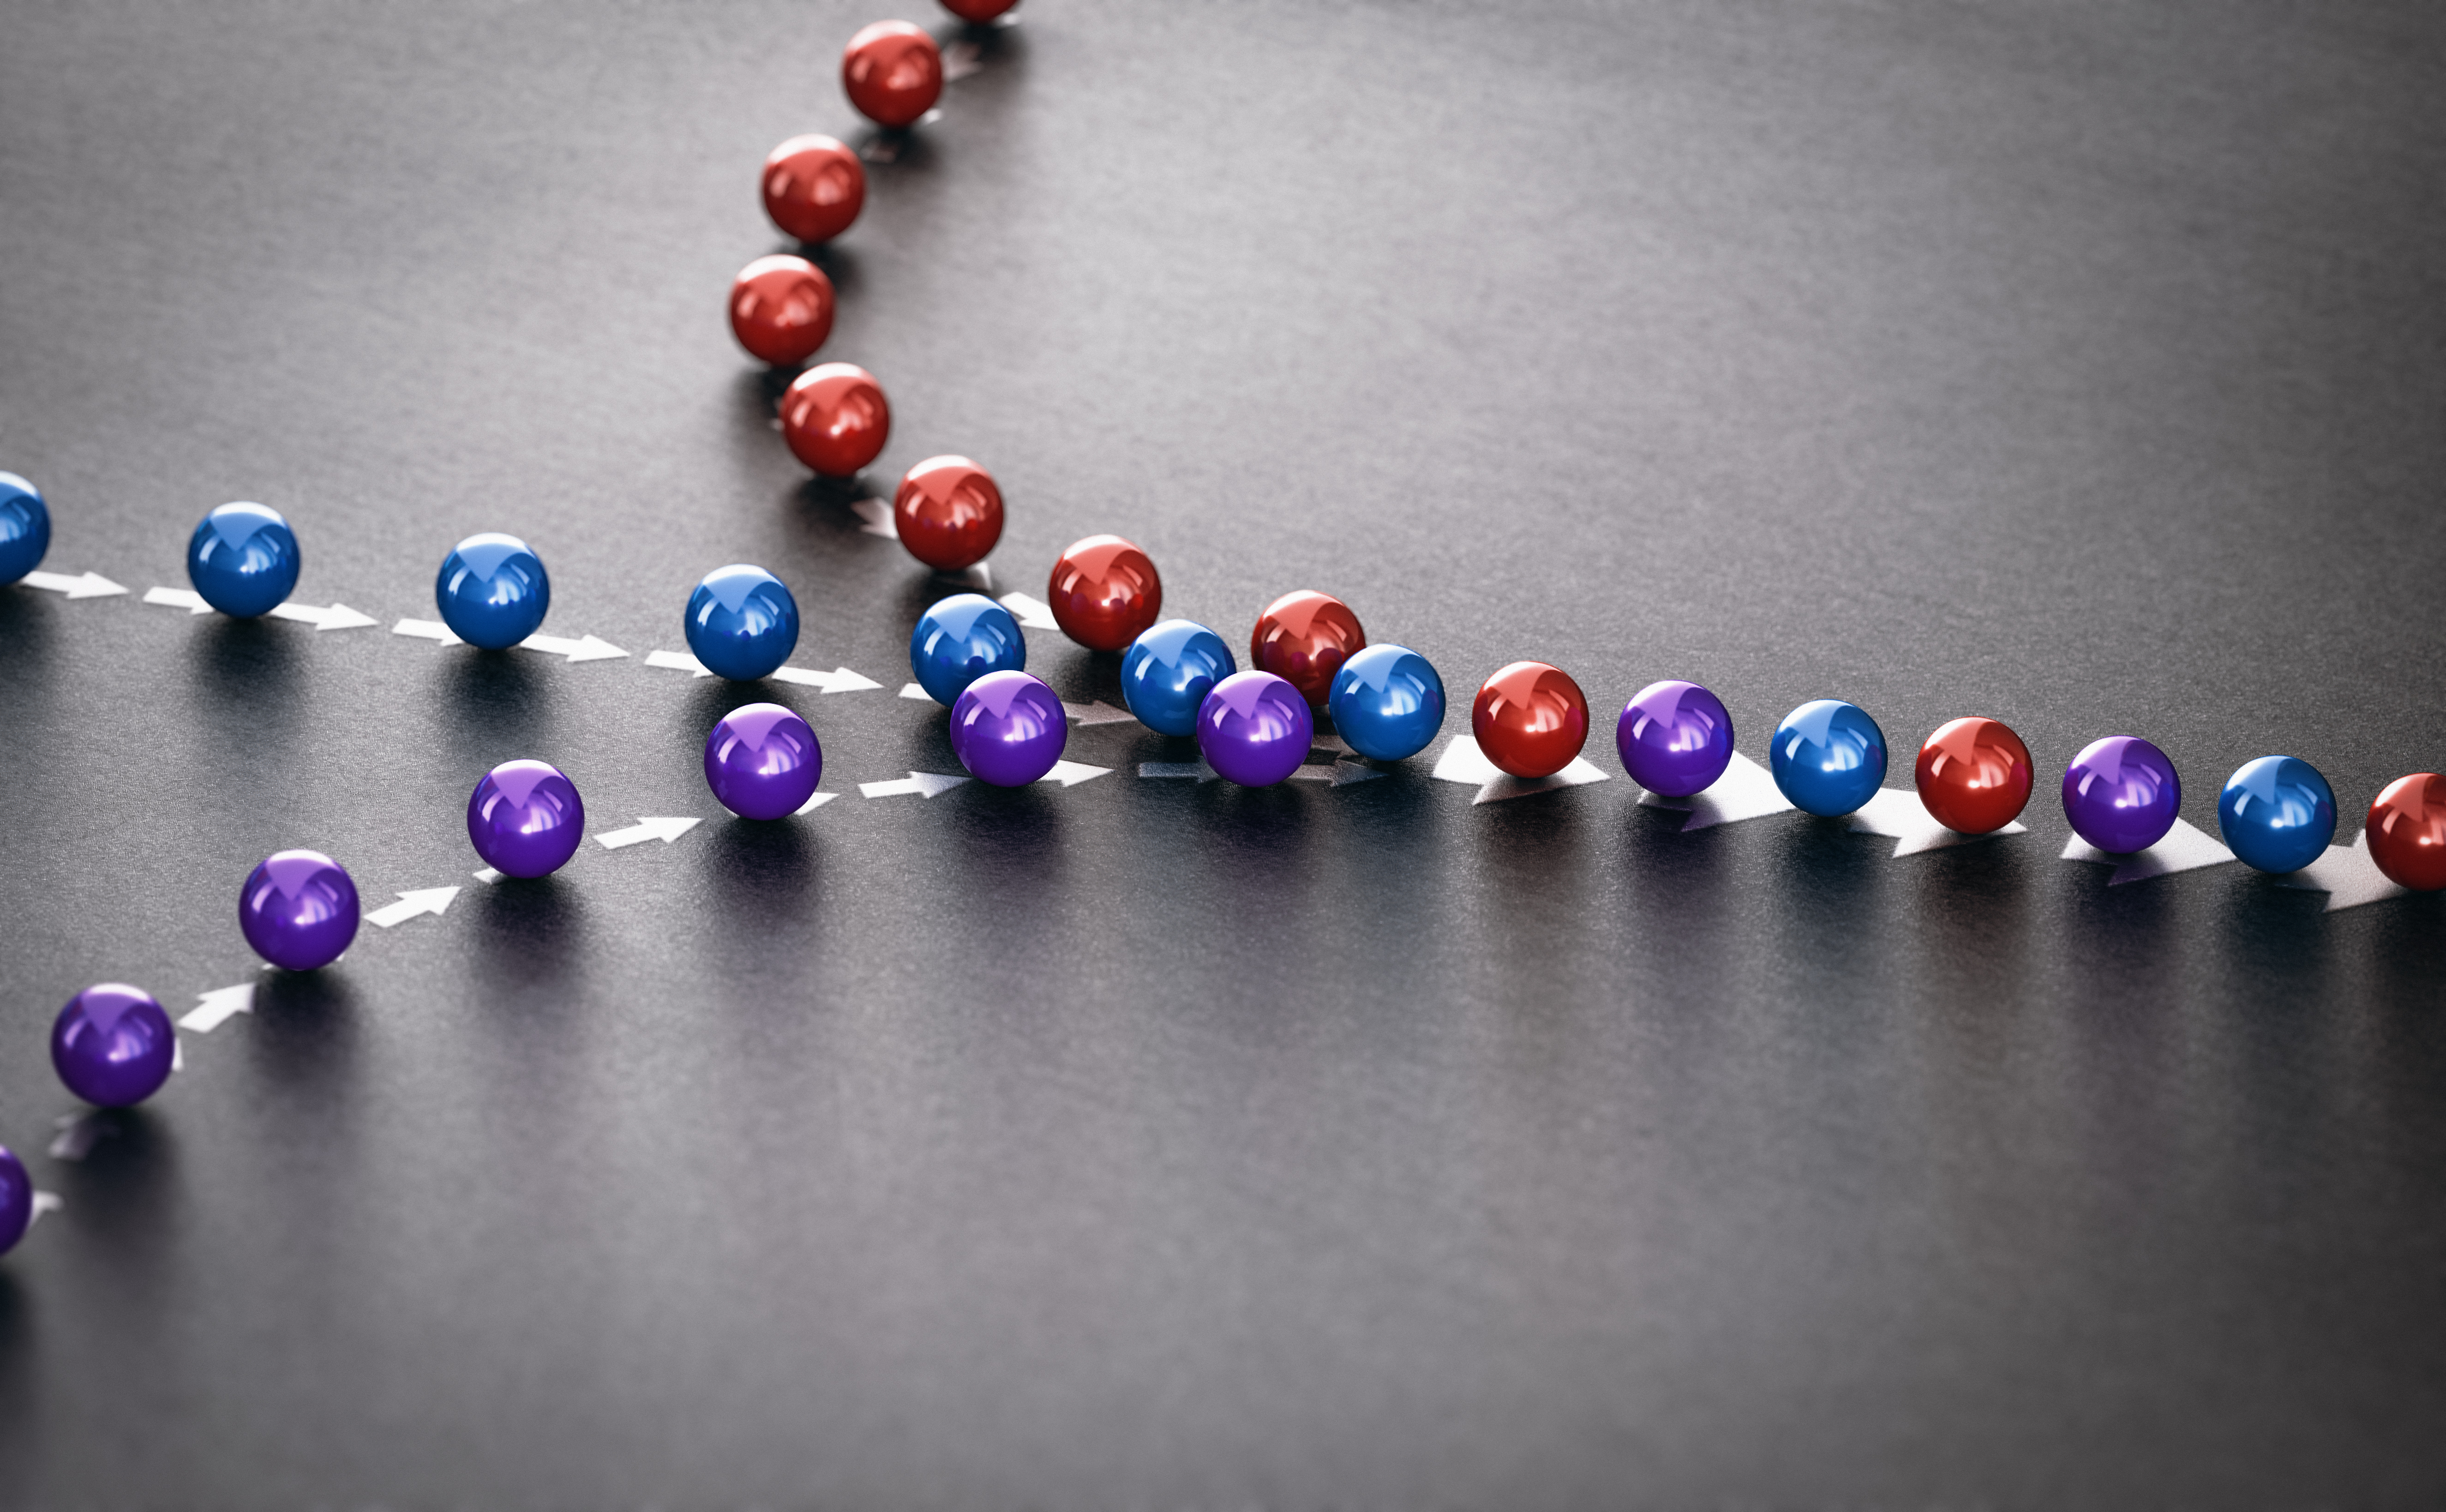 Three lines of red, blue, and purple balls converging into one line going in the same direction.